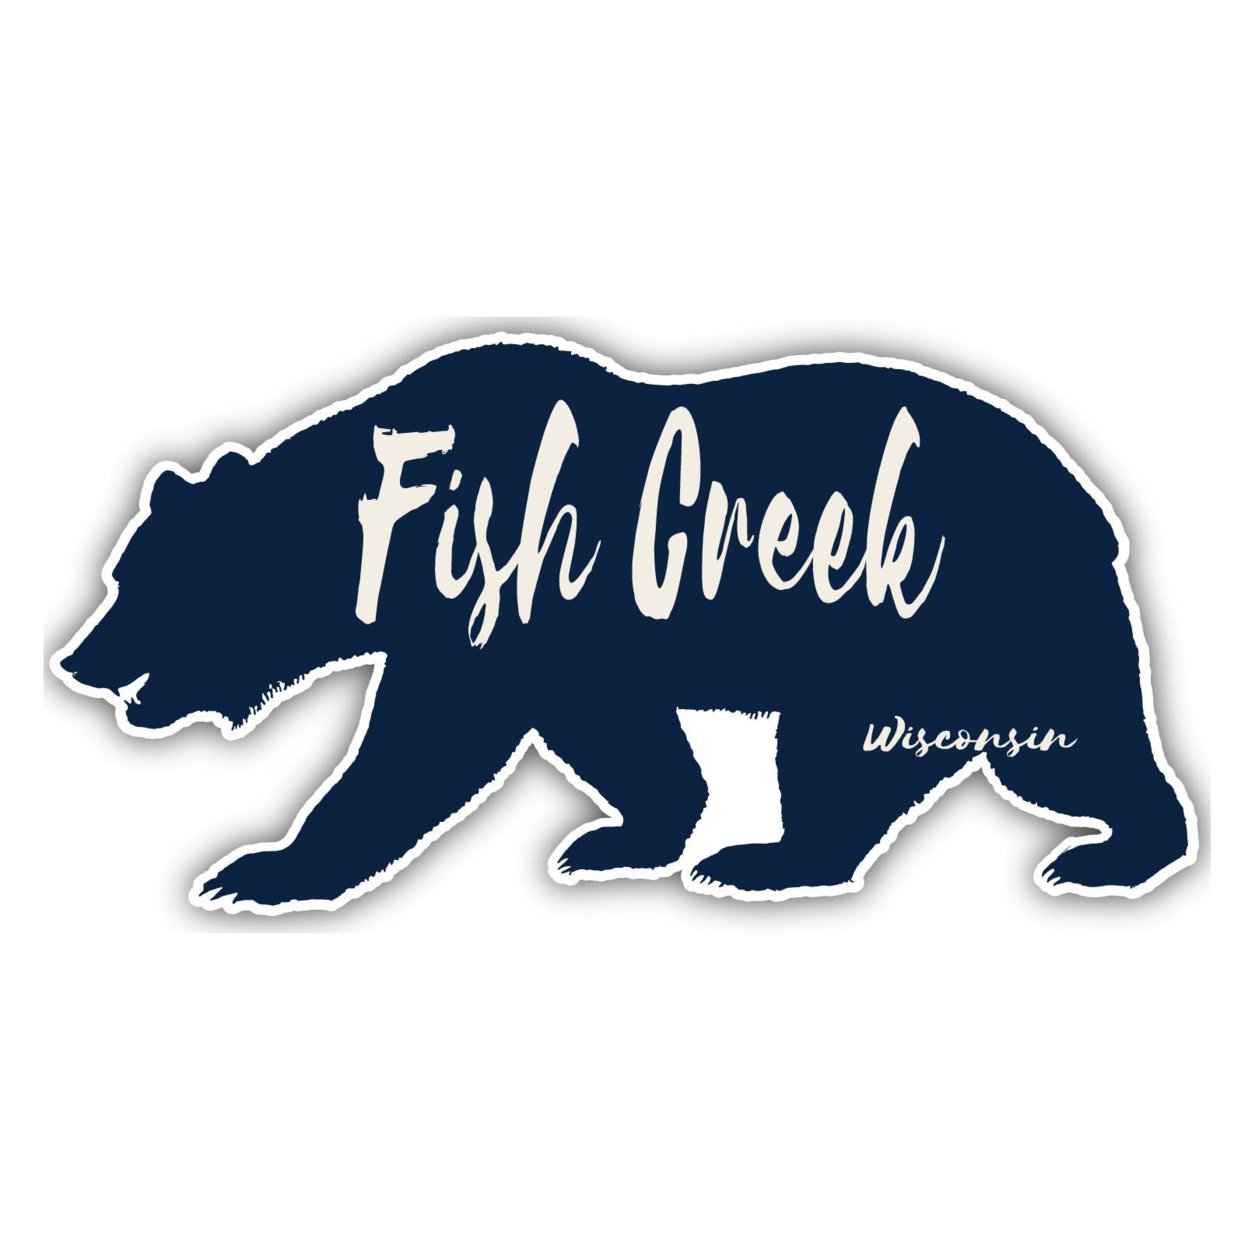 Fish Creek Wisconsin Souvenir Decorative Stickers (Choose Theme And Size) - 4-Pack, 8-Inch, Bear